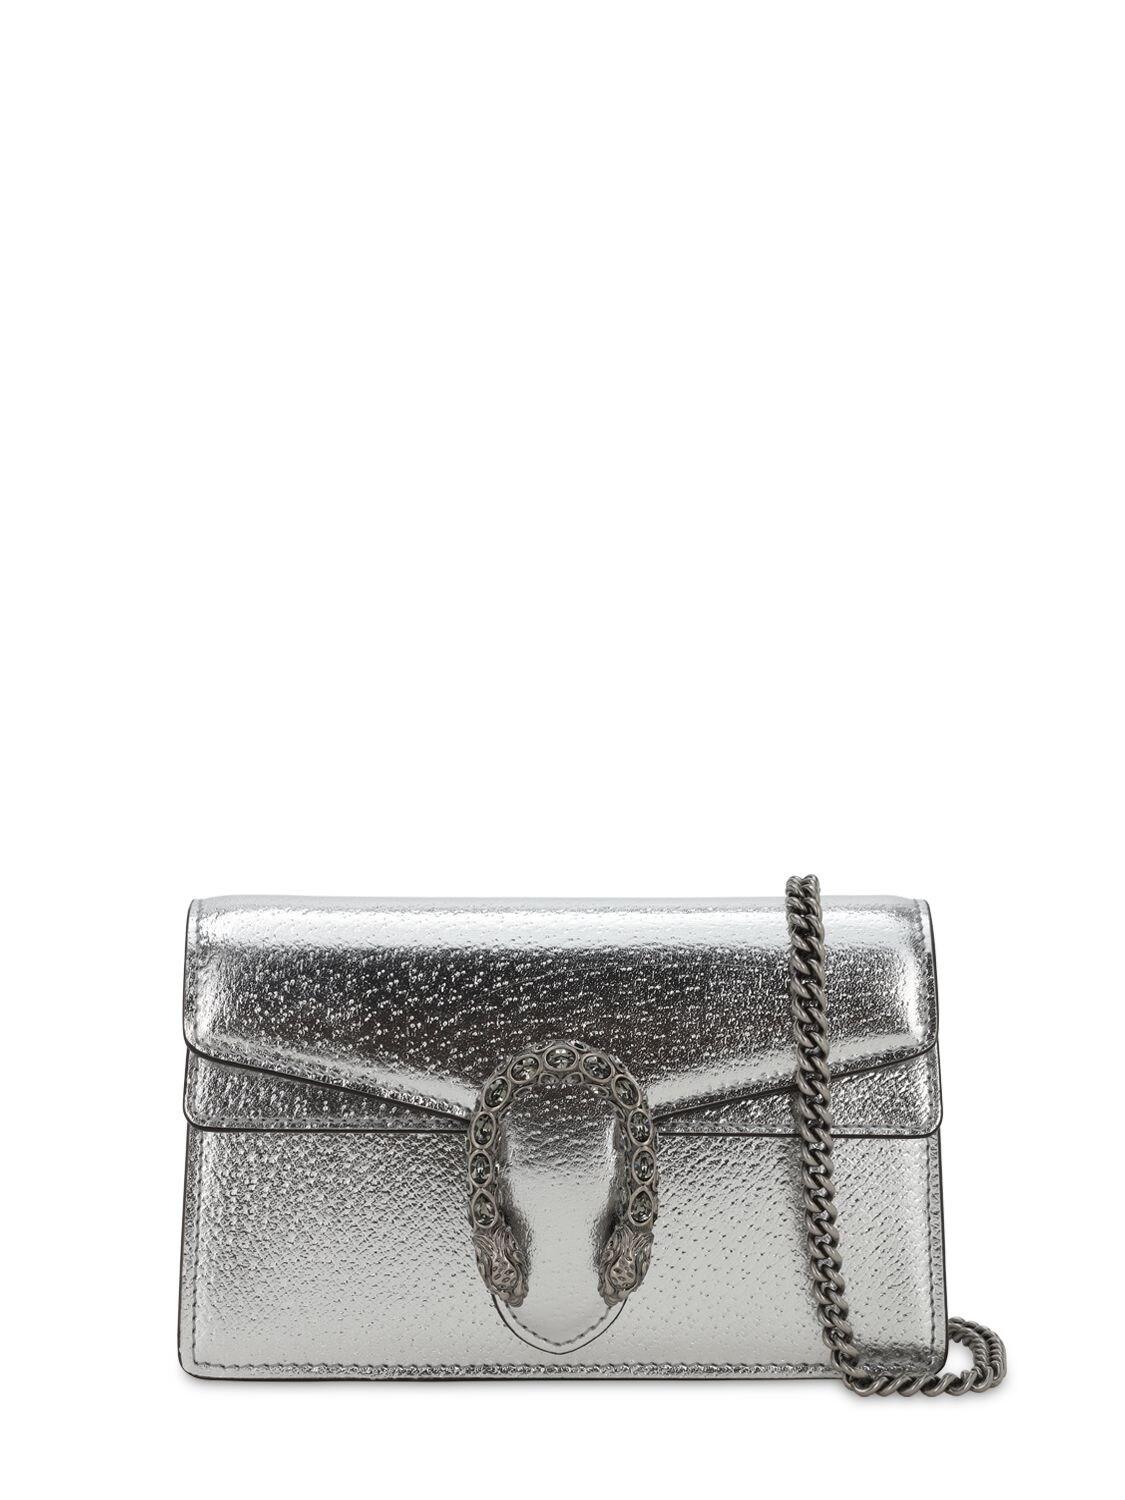 Gucci Small Dionysus Shoulder Bag in Silver (Gray) - Save 73% | Lyst